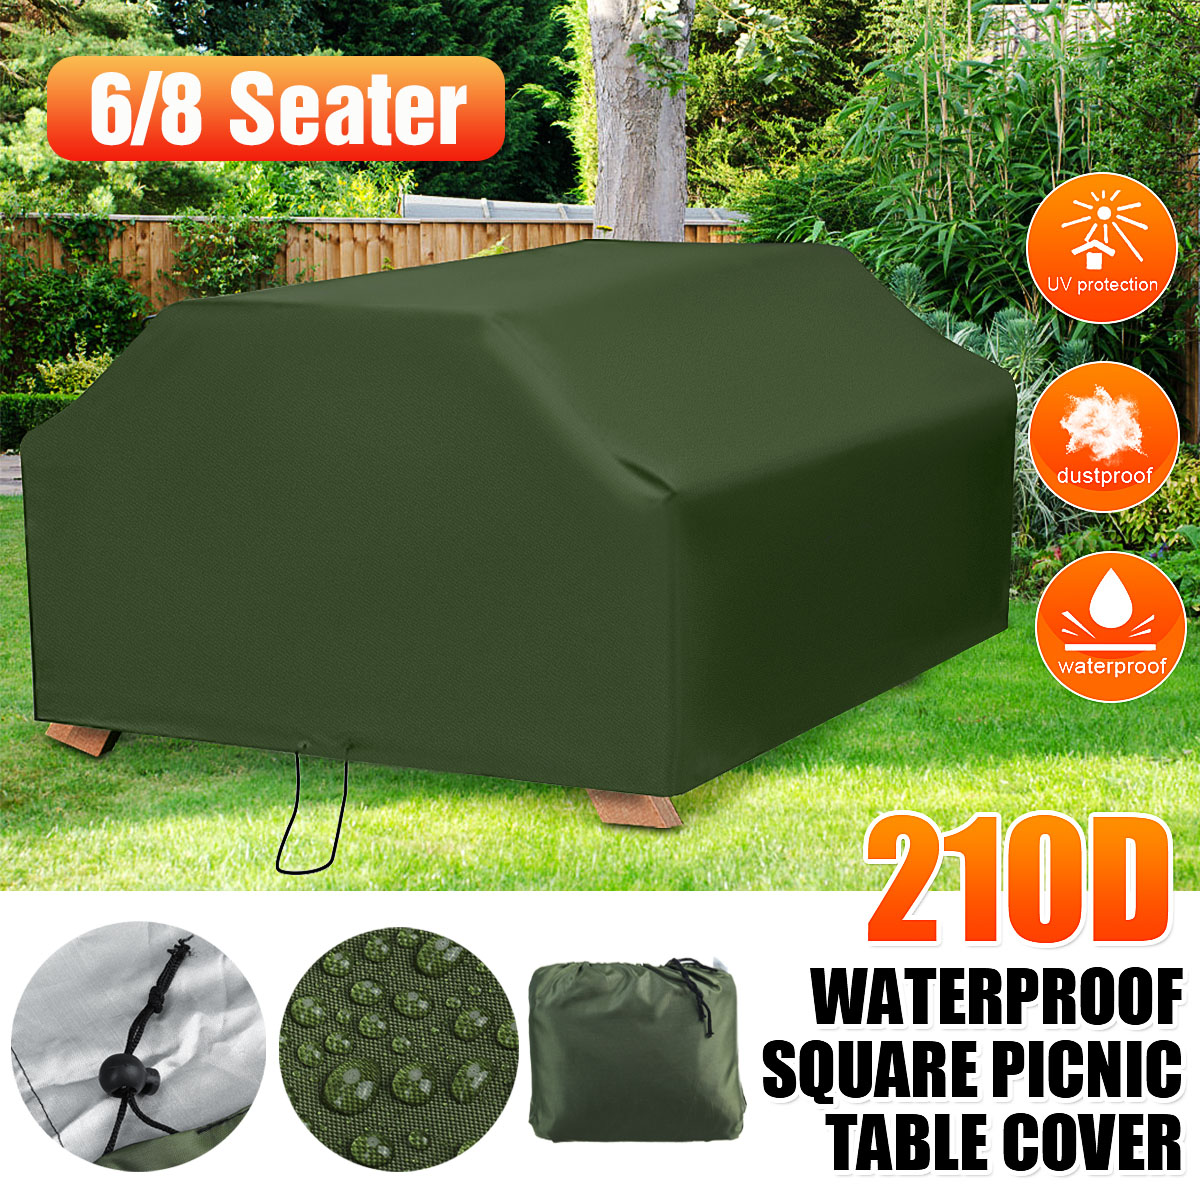 68-Seater-Waterproof-Table-Cover-Outdoor-Square-Tablecloth-Tear-Resistant-Picnic-Table-1750641-1